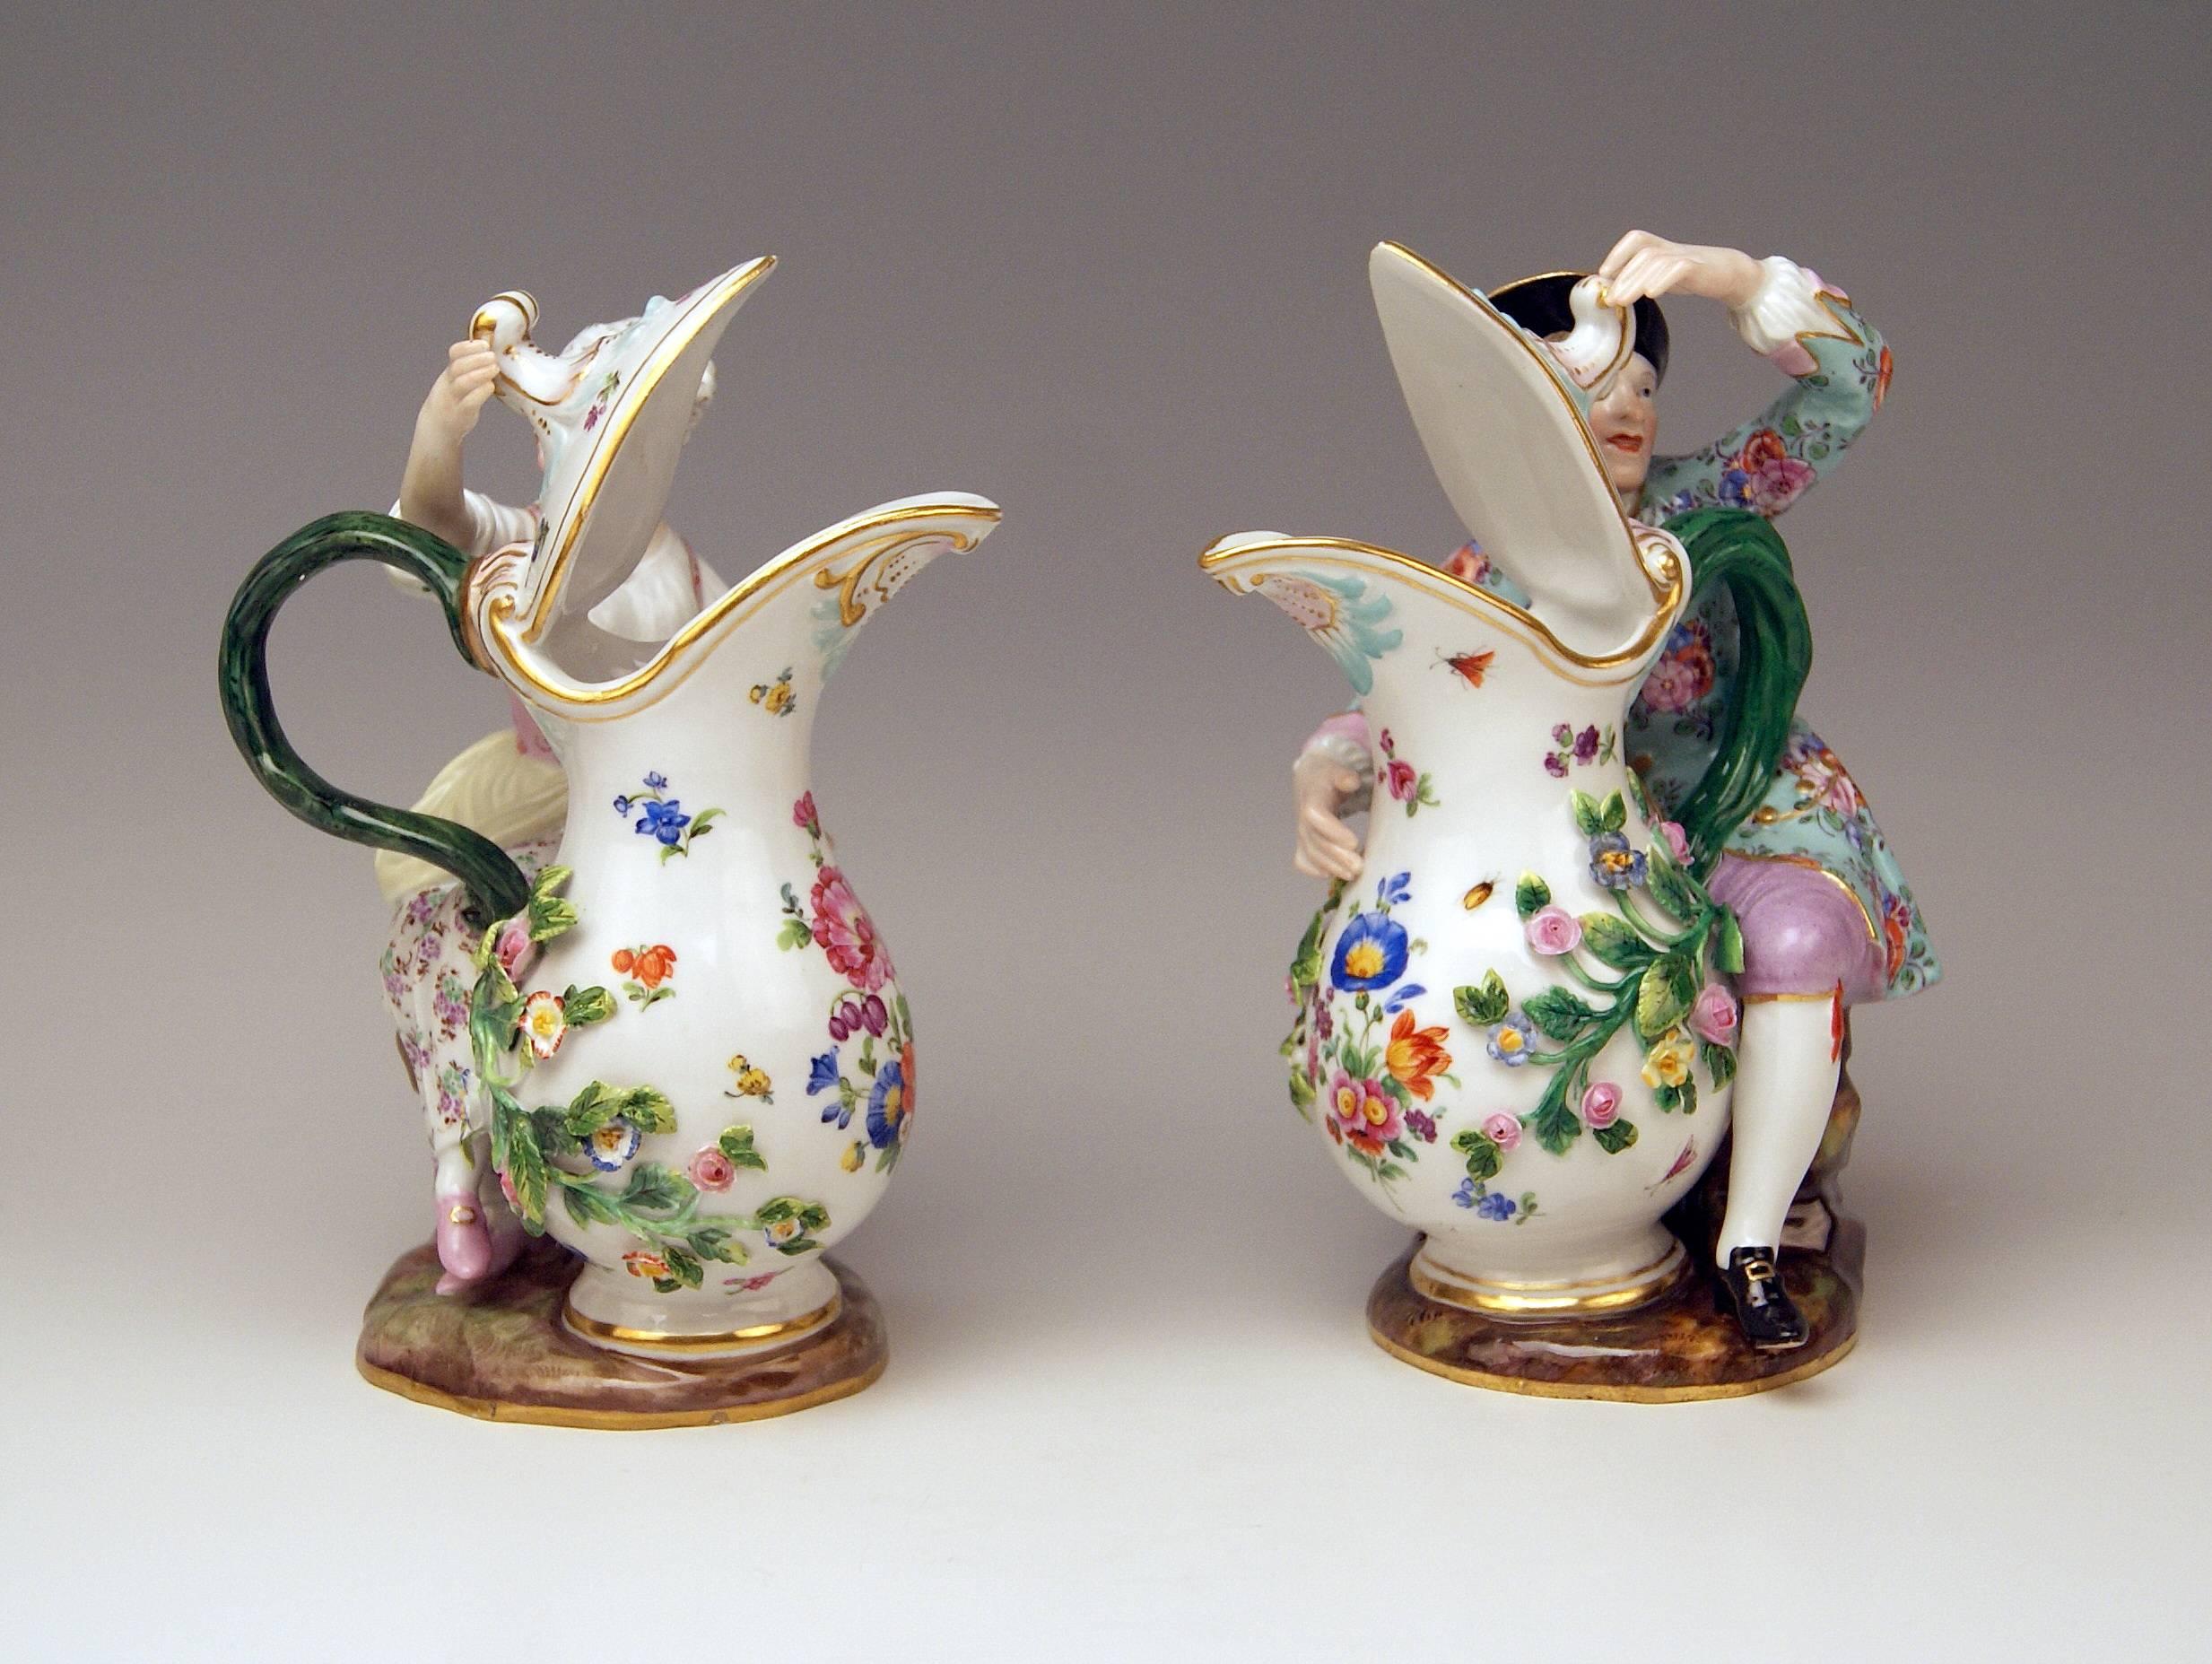 MEISSEN STUNNING PAIR OF FIGURINES OF VERY INTERESTING APPEARANCE:  PEASANT AND PEASANT WOMAN WITH JUG / PITCHER
MODELS 1234 & 907

MEASURES:
PEASANT WOMAN
height: 7.87 inches  (= 20.0 cm)
width:   5.31 inches  (= 13.5 cm)
depth:  3.54 inches  (= 